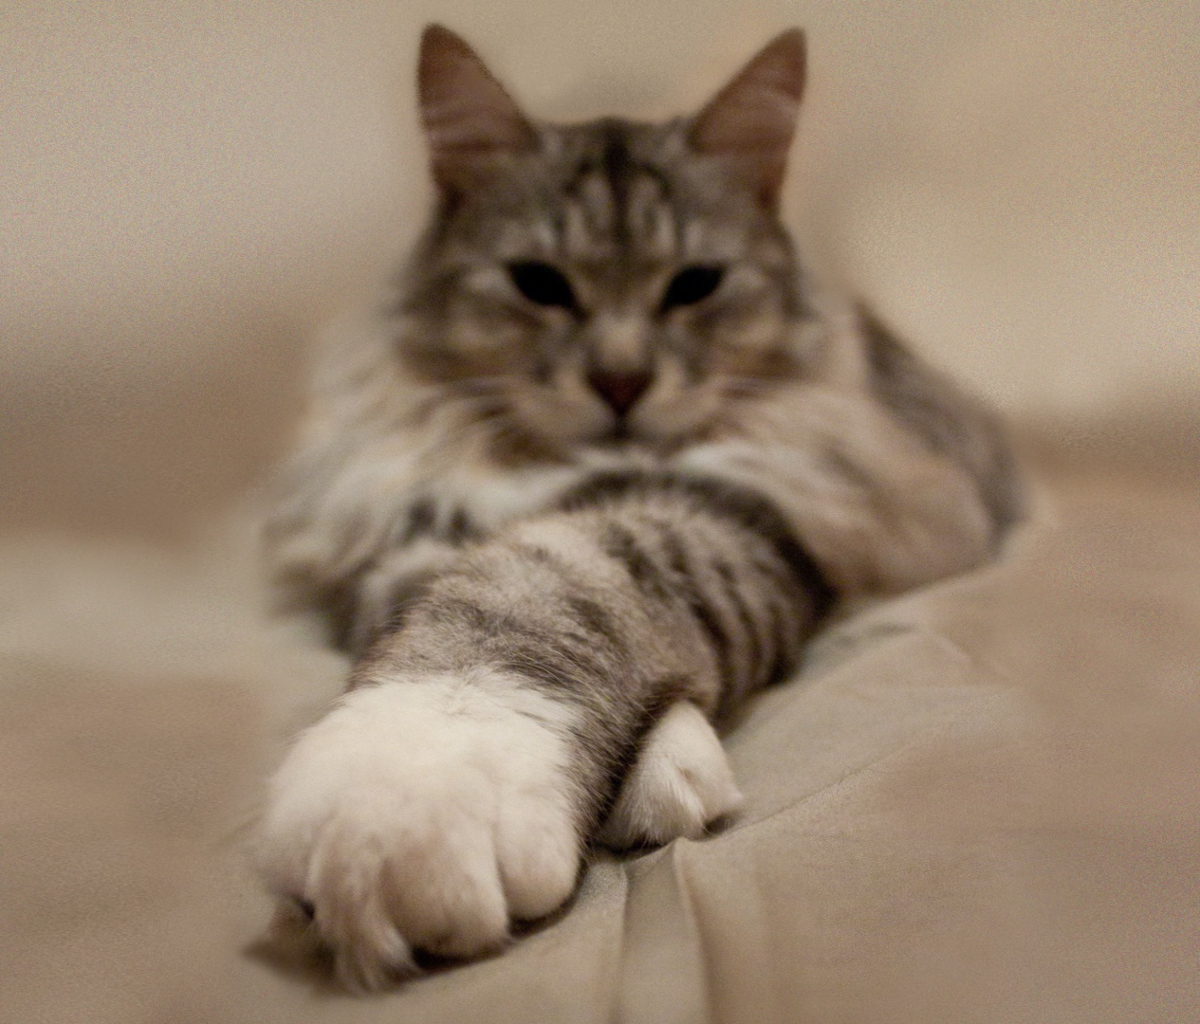 Cat On Bed wallpaper 1200x1024